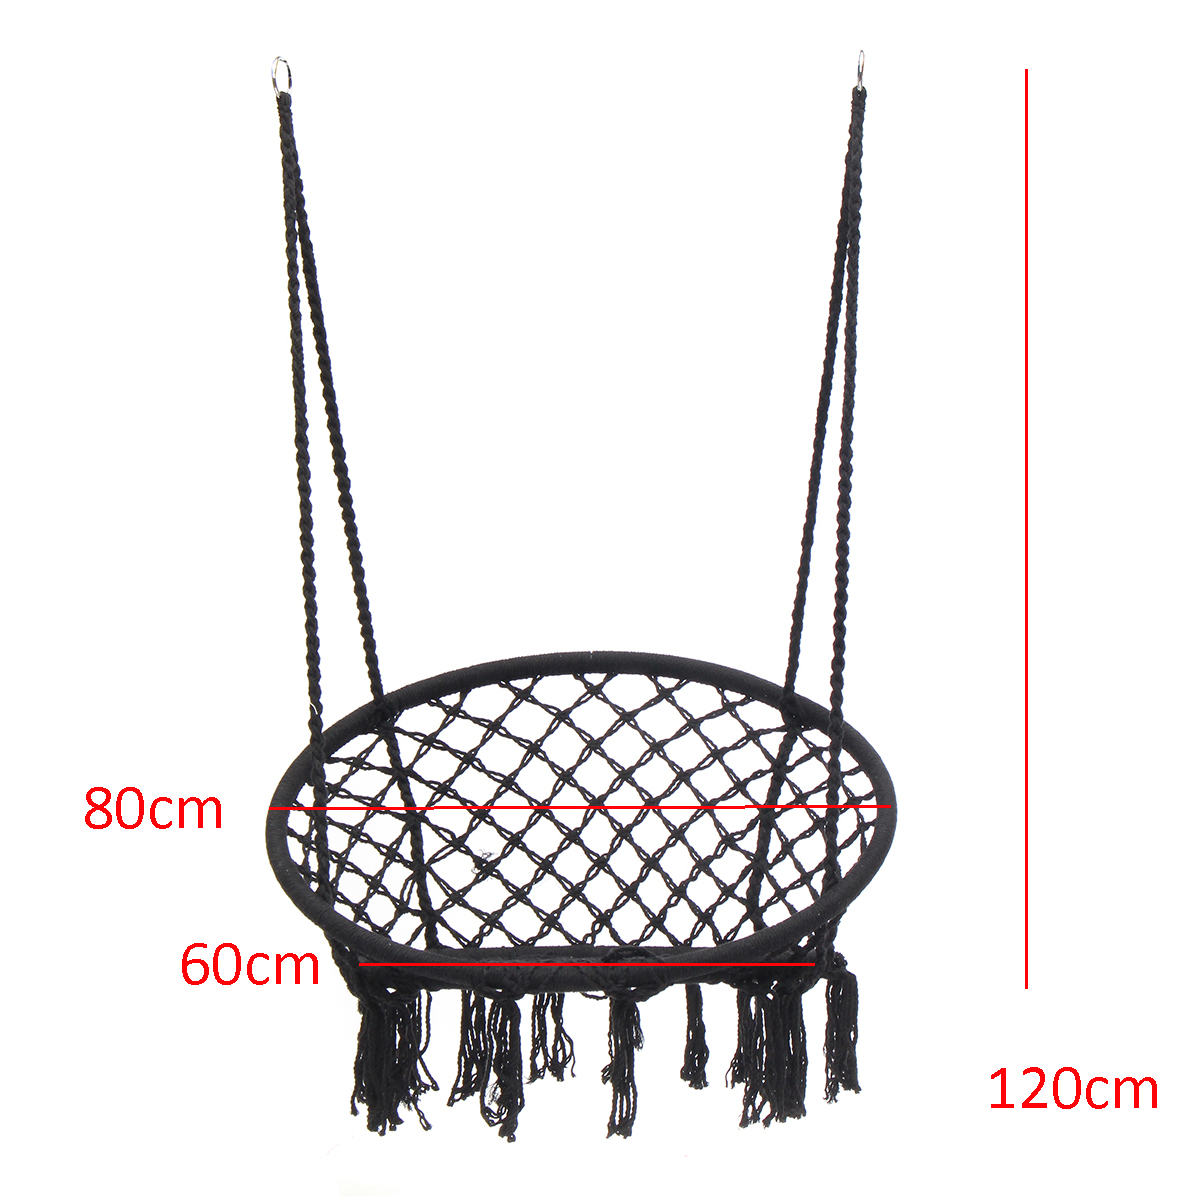 AUGIENB Hammock Chair Hanging Chairs Mesh Woven Macrame Swing Garden Indoor Outdoor Home Decor,100/120/150KG Load-Bearing Christmas Gift - image 5 of 7